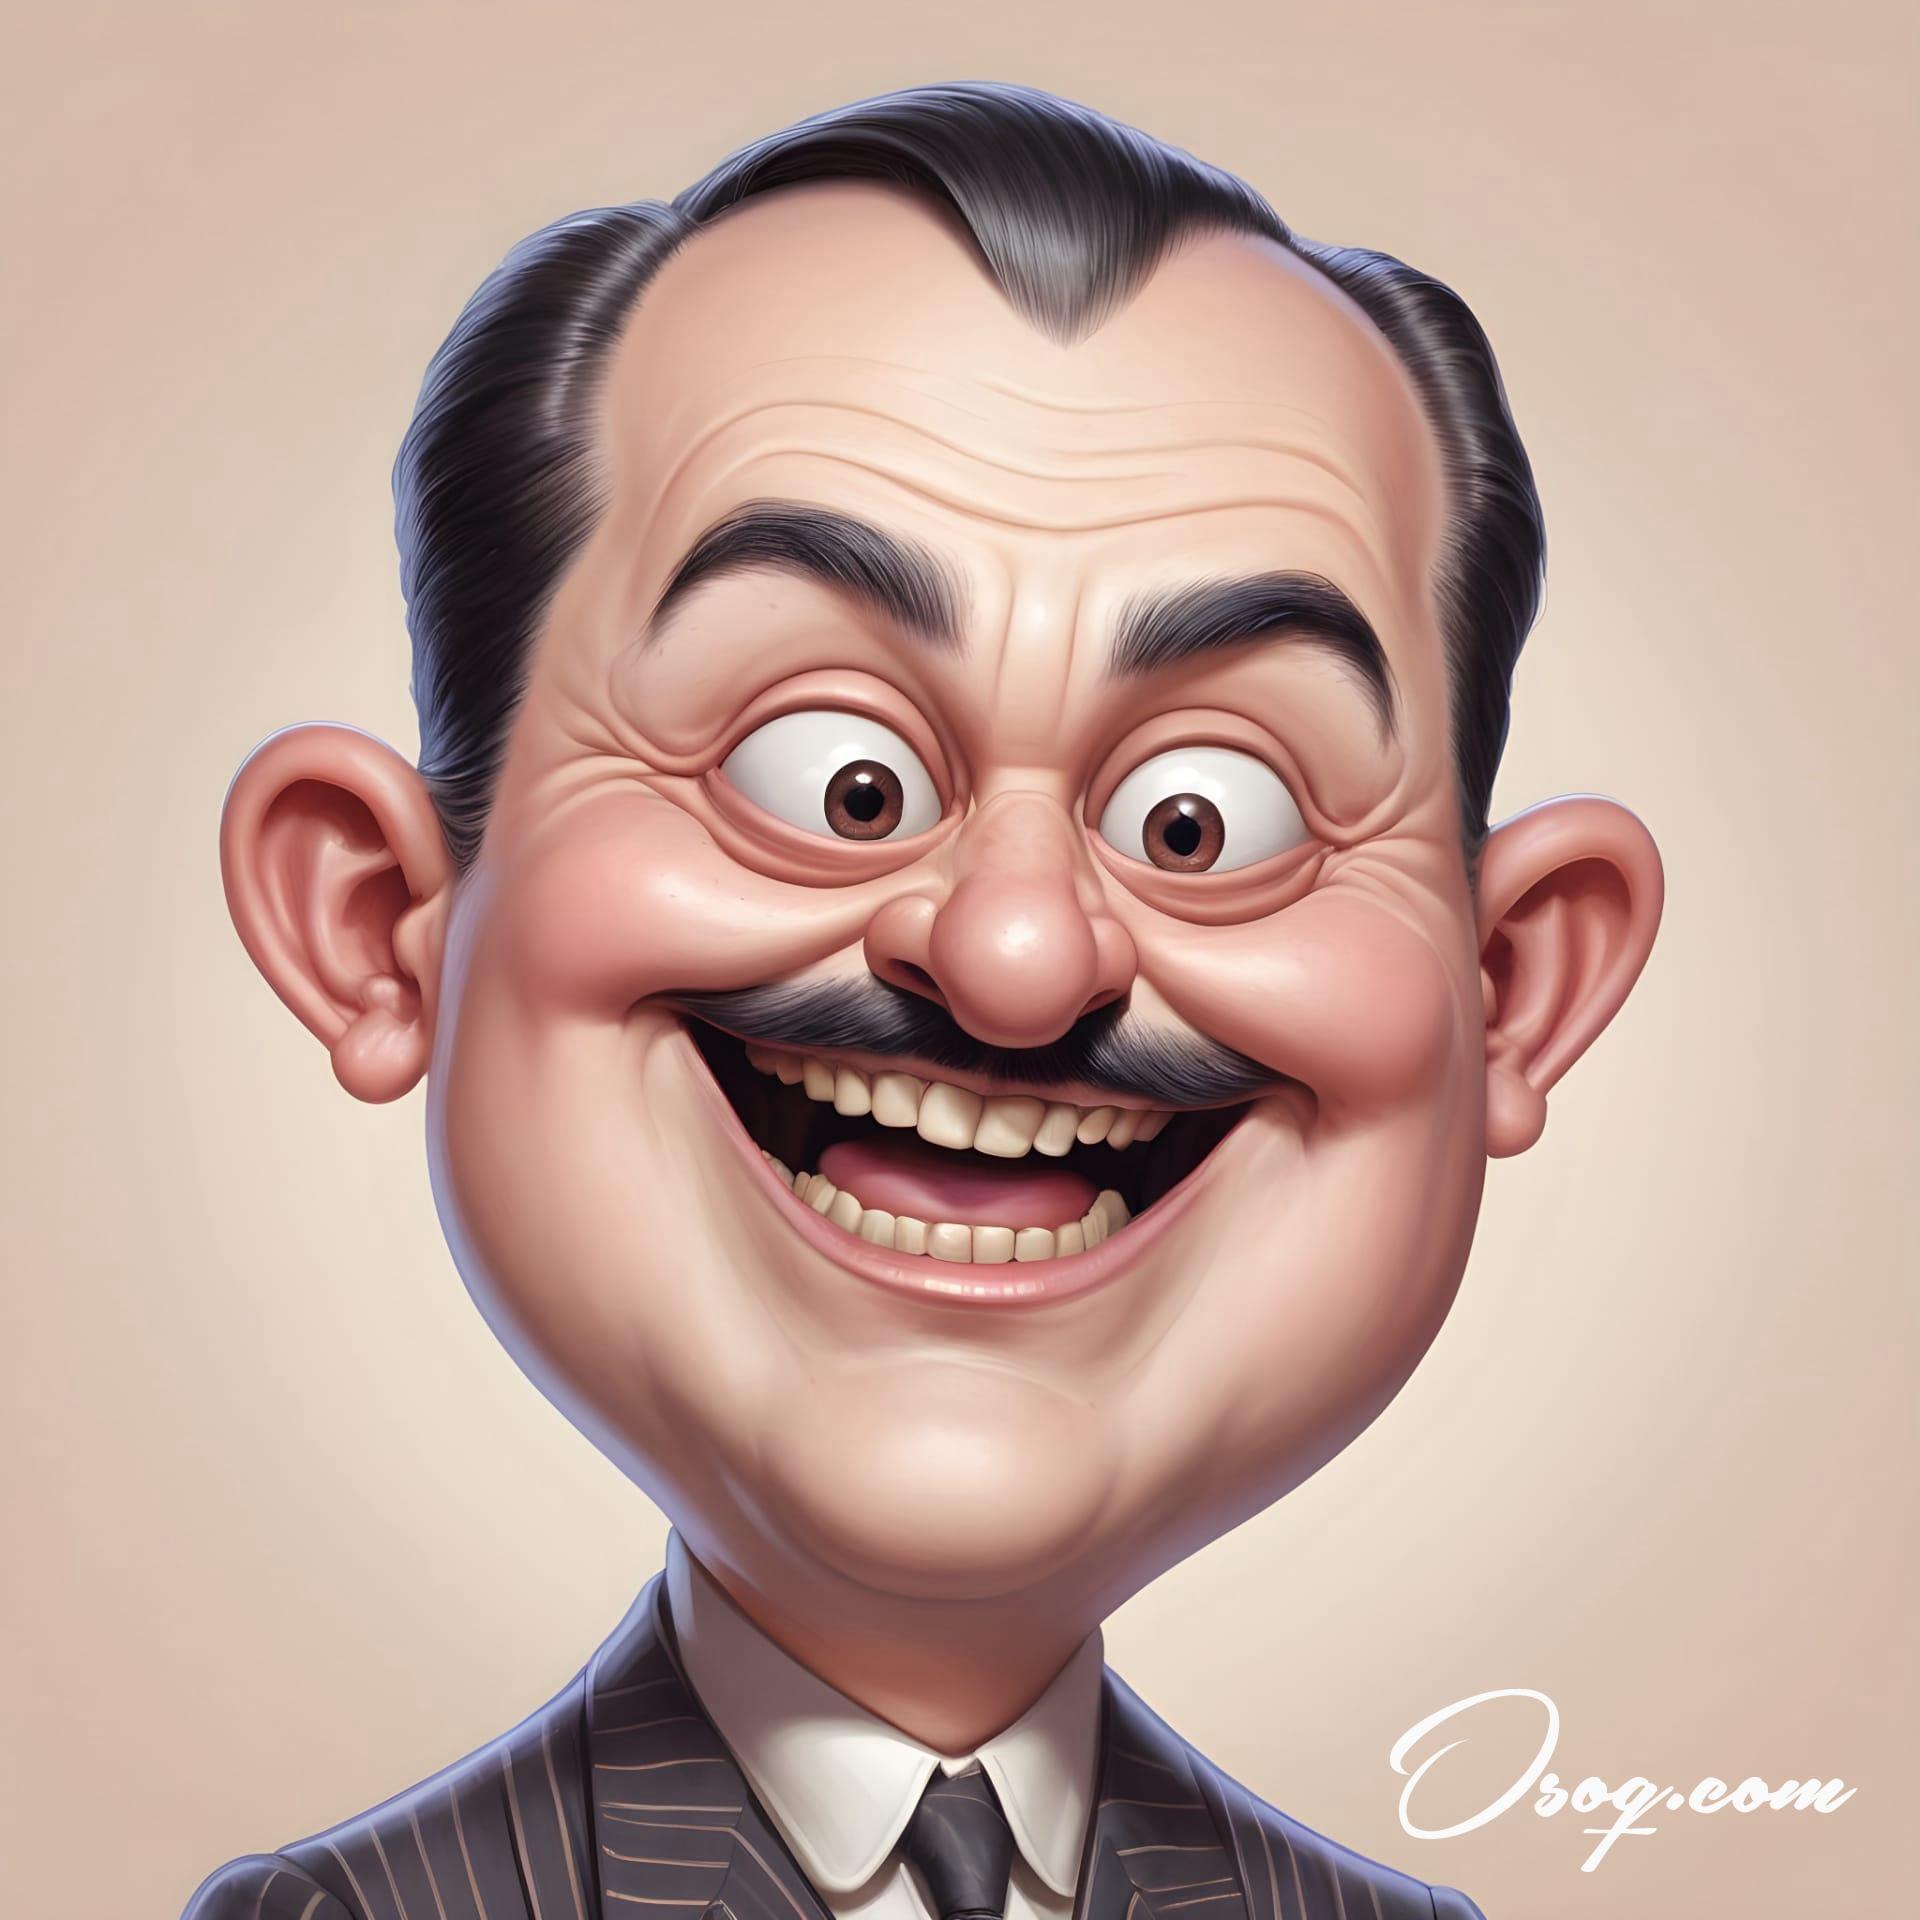 Addams family caricature 09